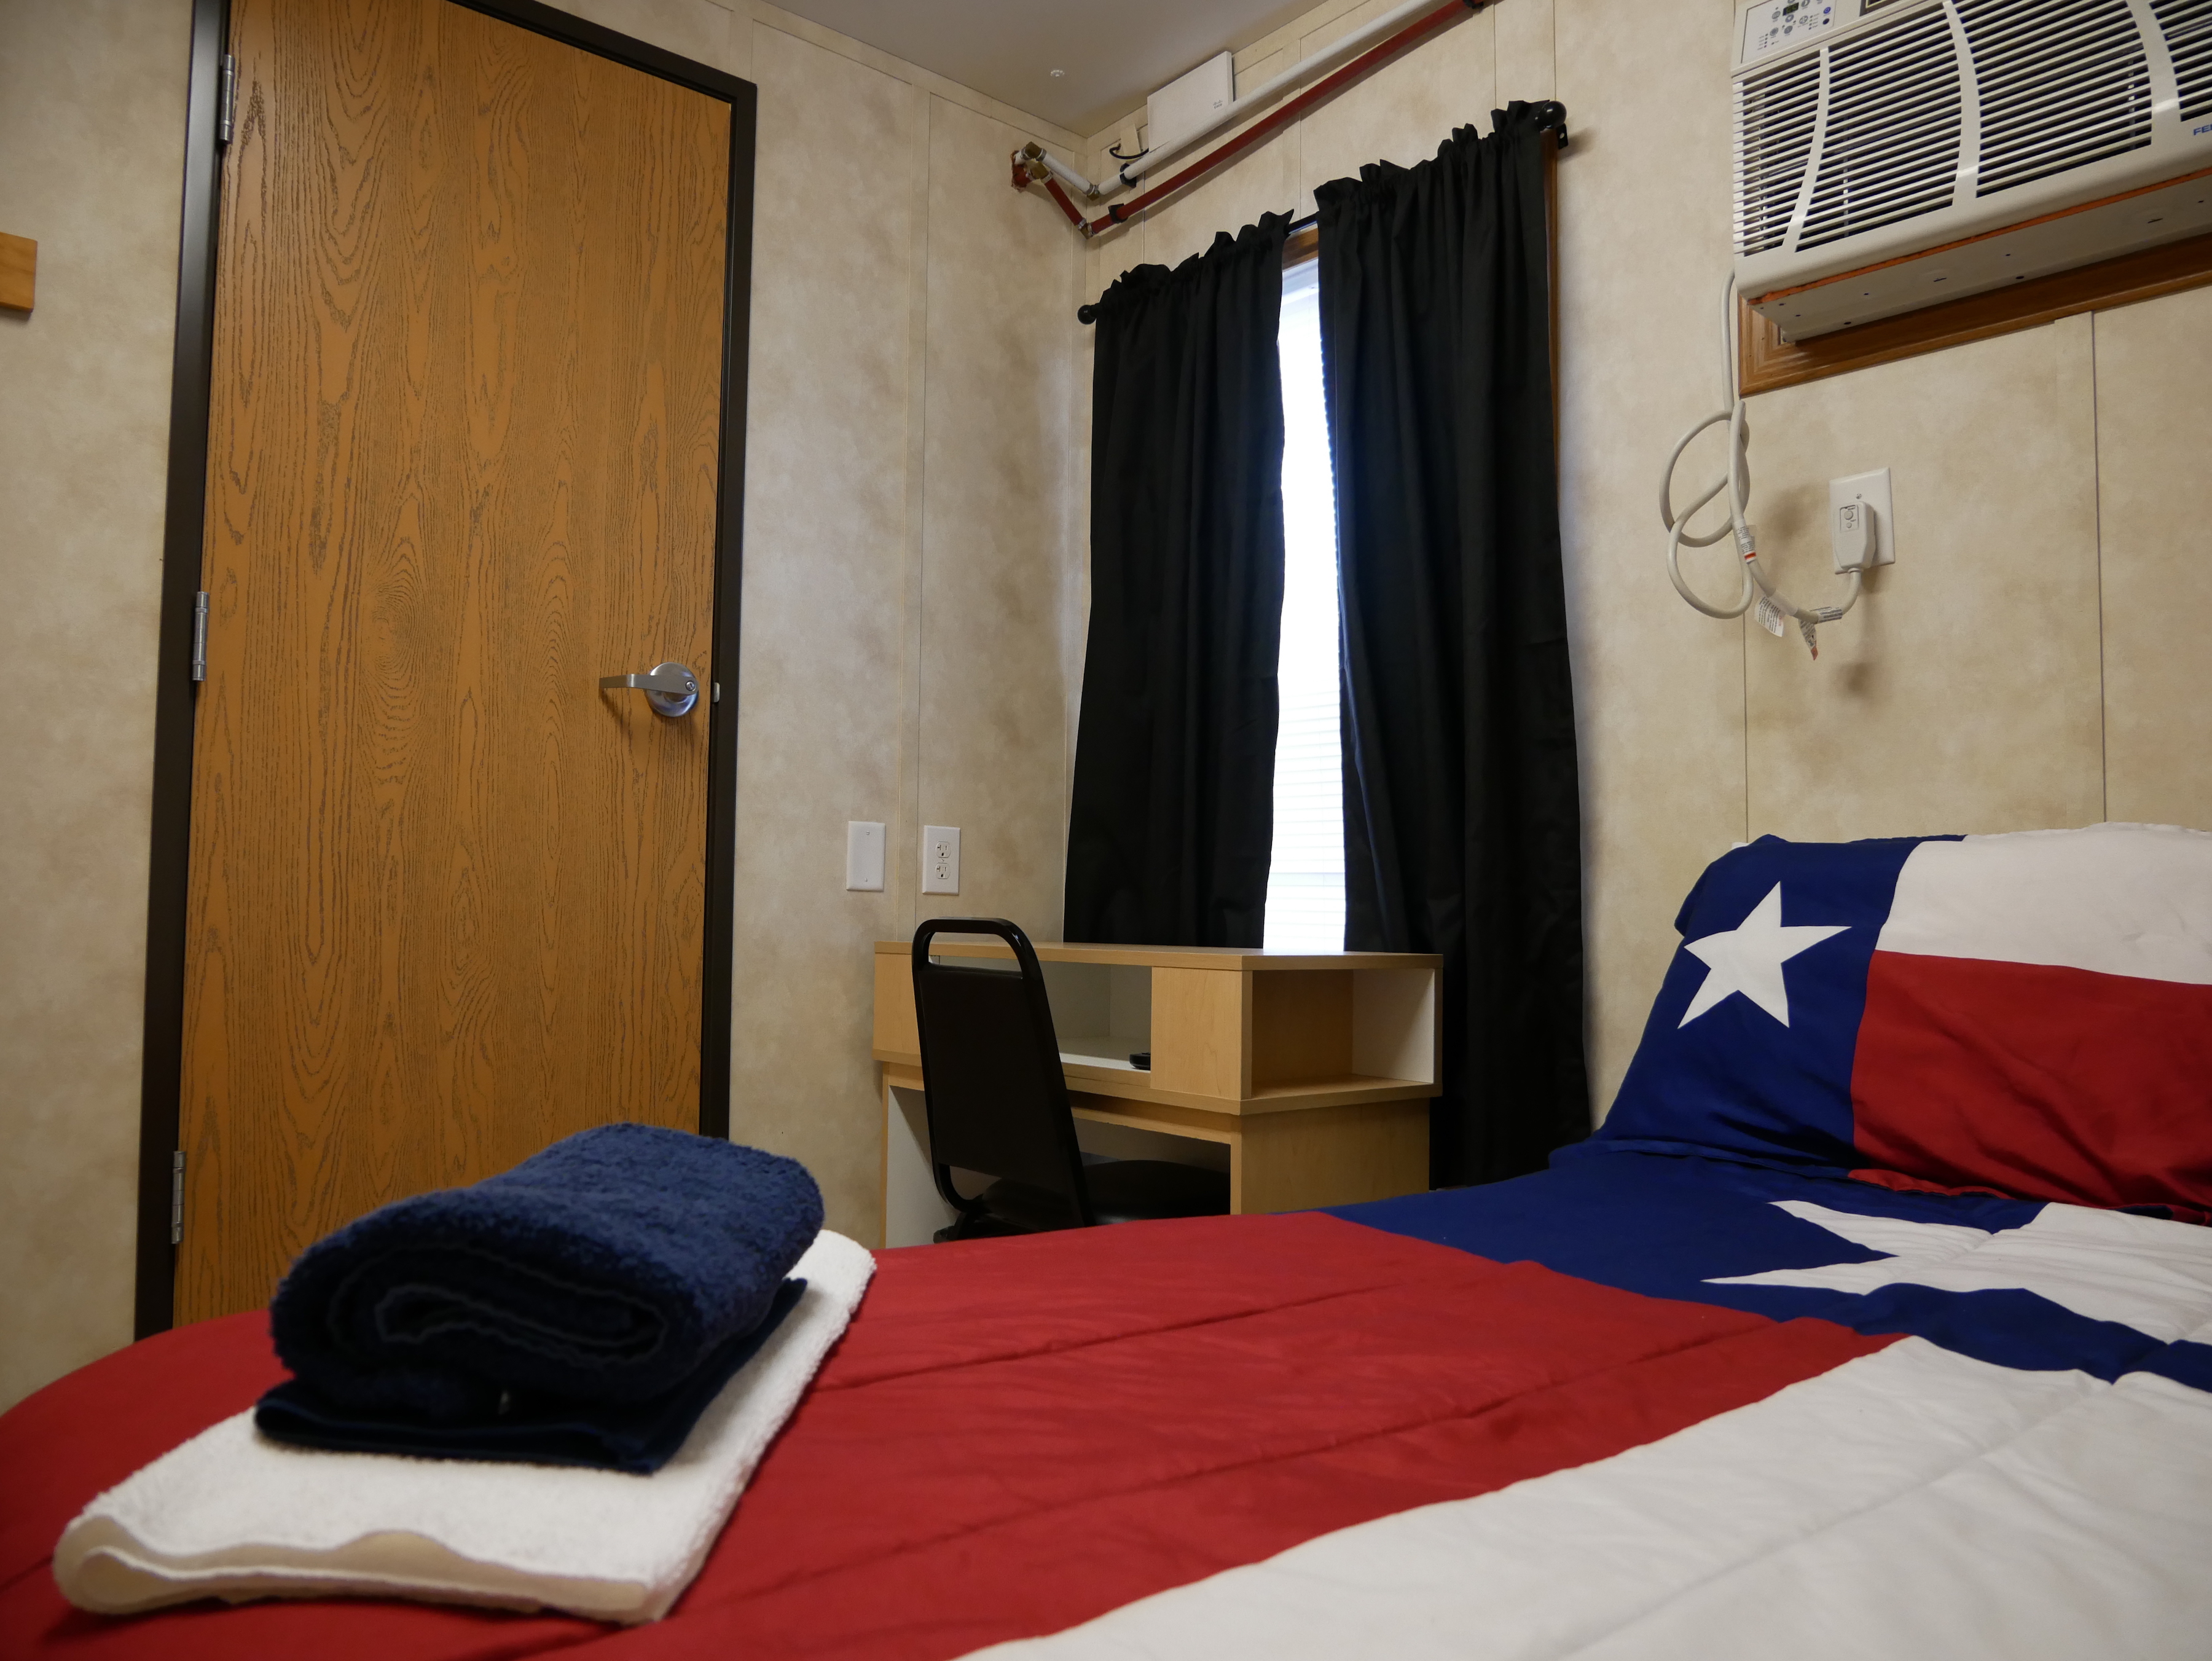 A picture of an interior of a room at a workforce housing camp, with Texas print bed sheets and blue curtains on the wall.